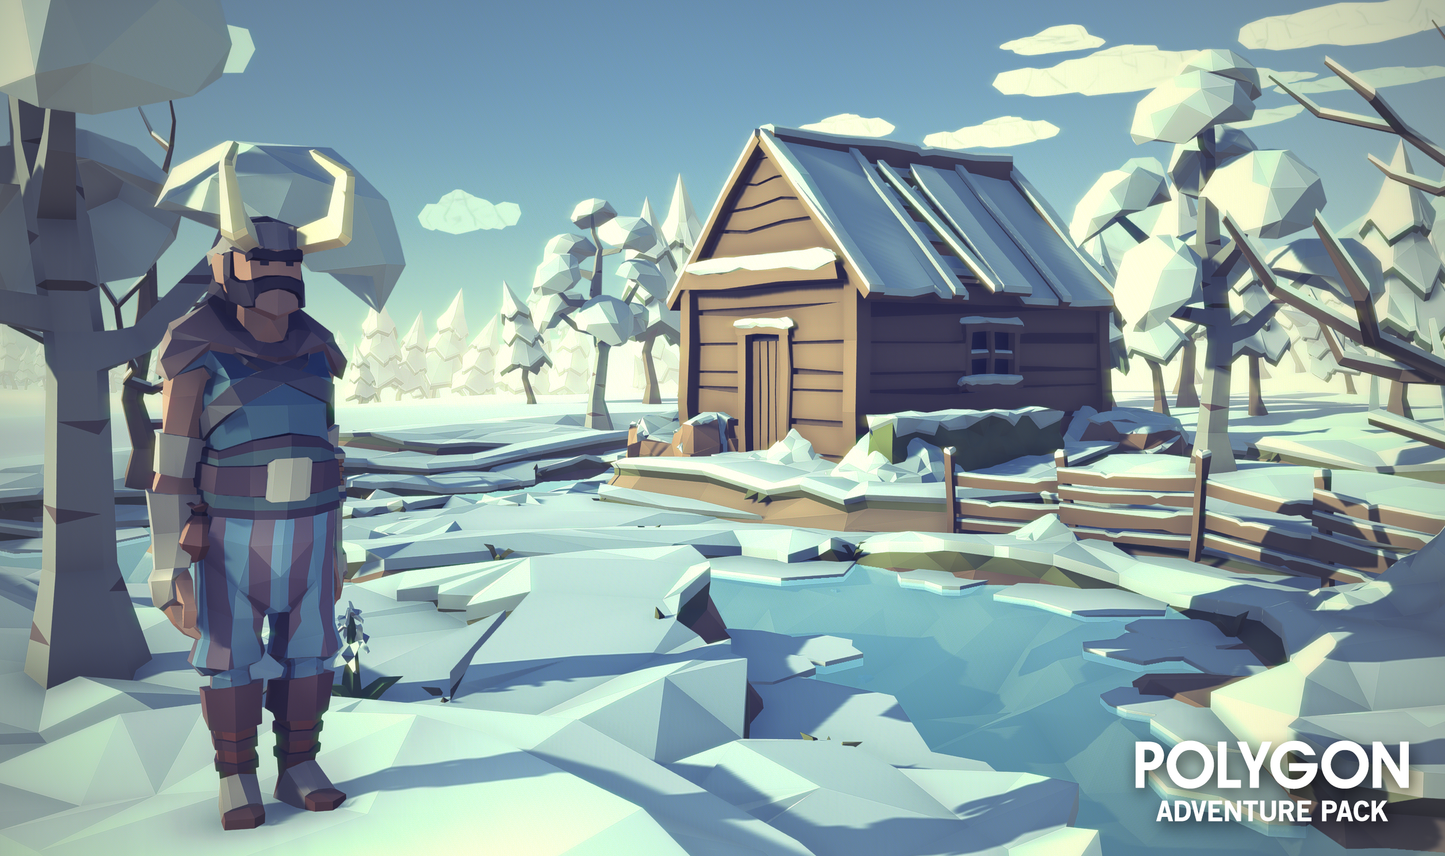 Viking character low poly 3d asset as part of the POLYGON Adventure Pack